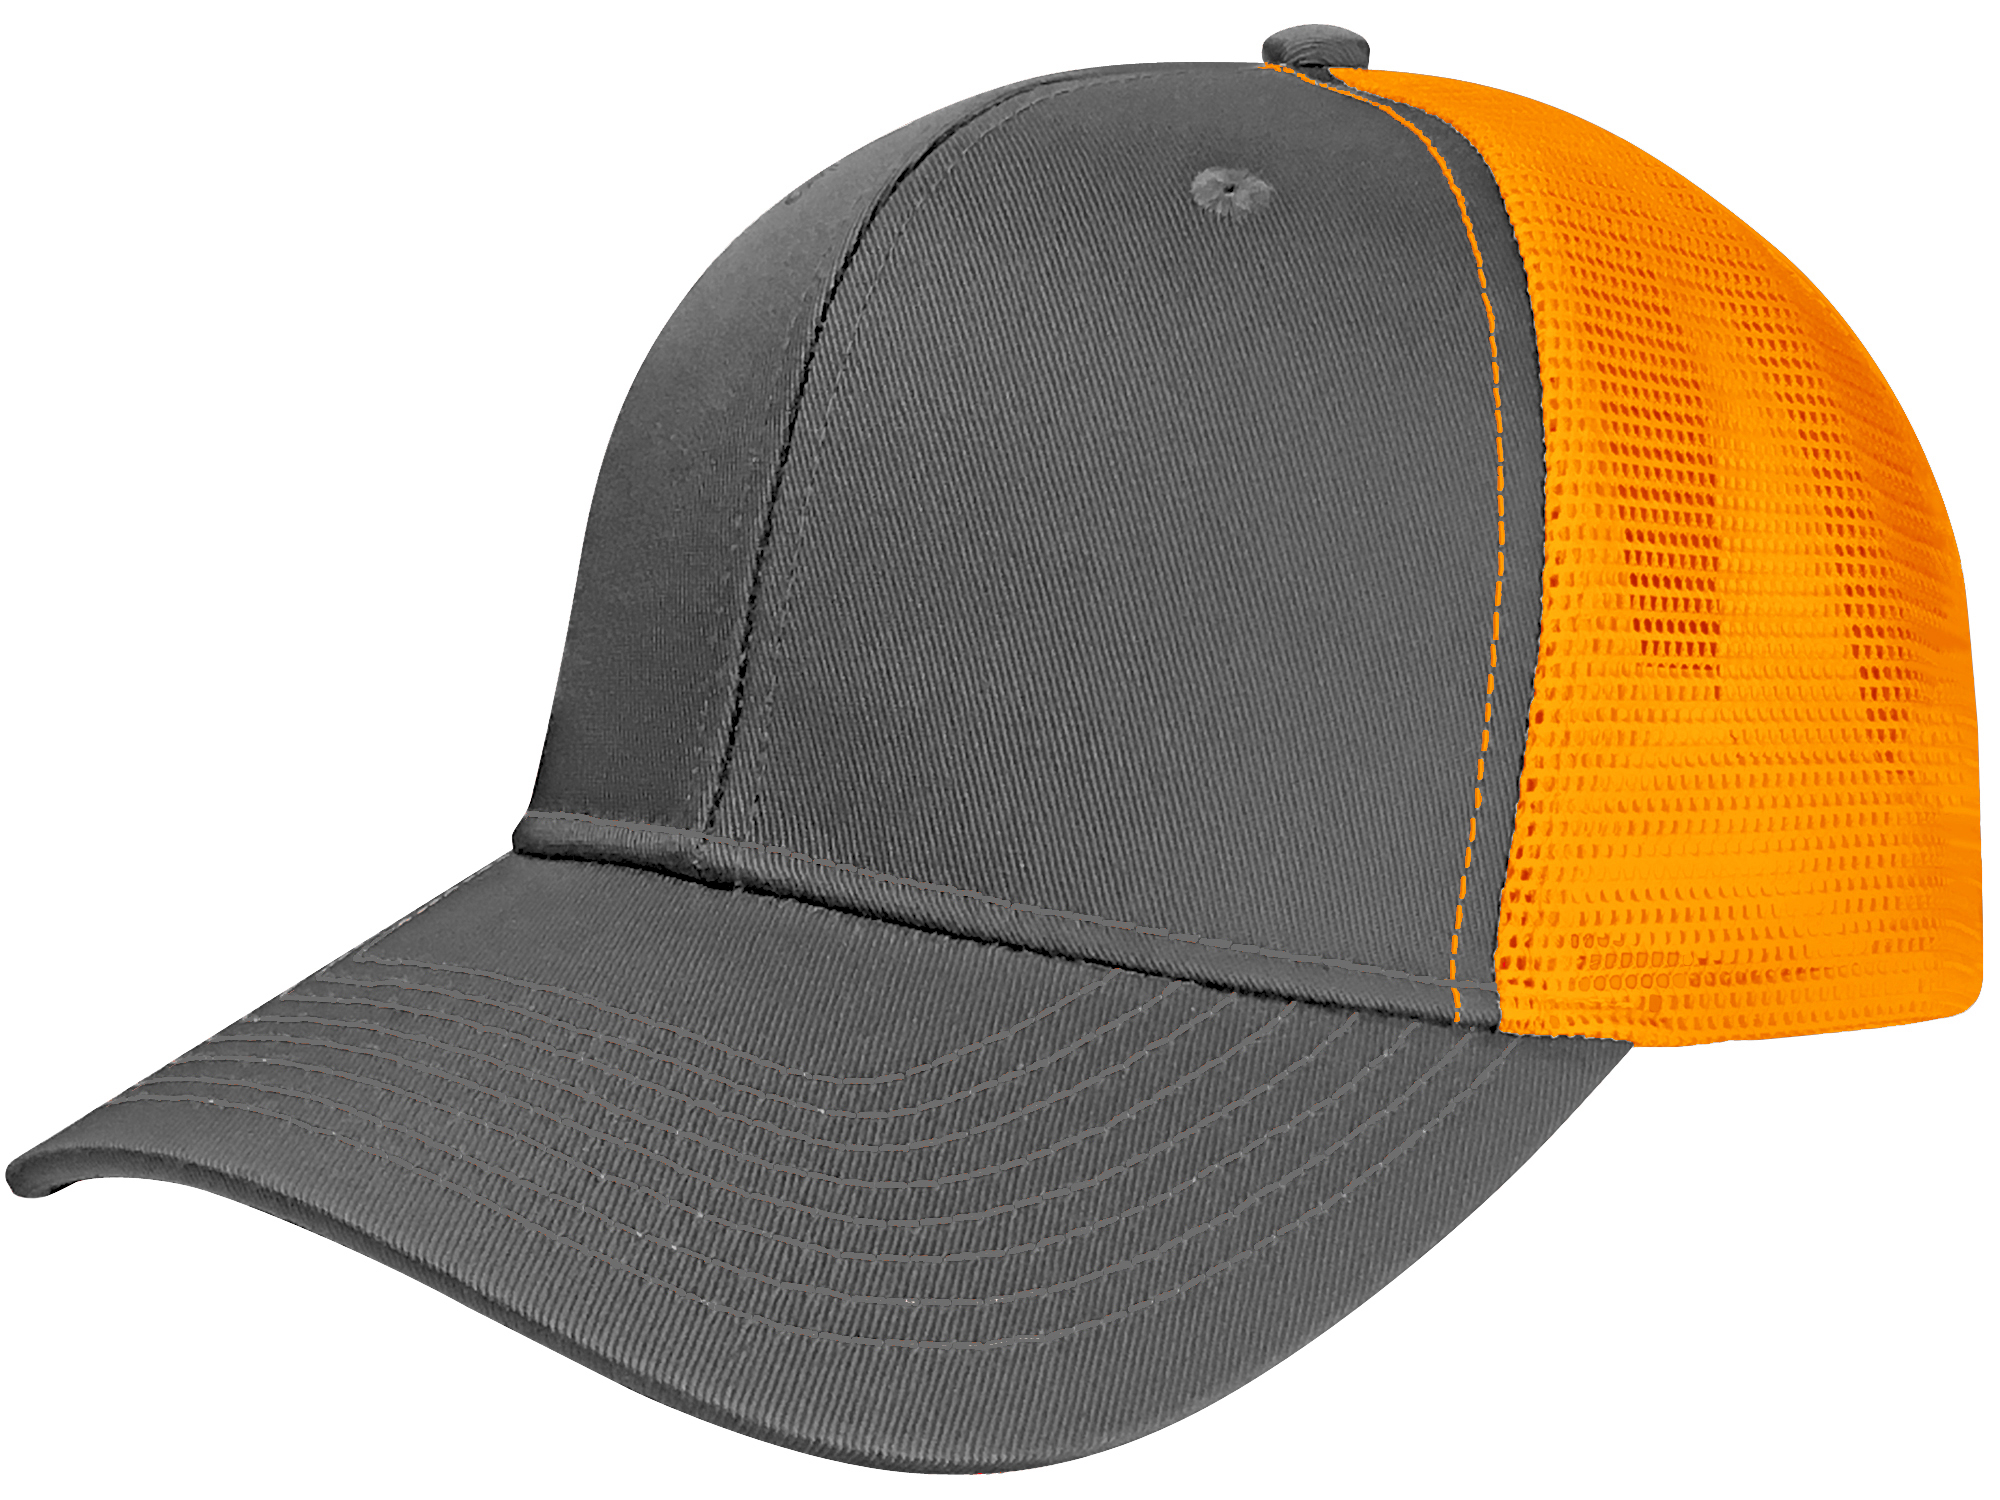 E126280 Sweet Caps CHARCOAL Flexfit Mesh Back Caps (Small/Med) only